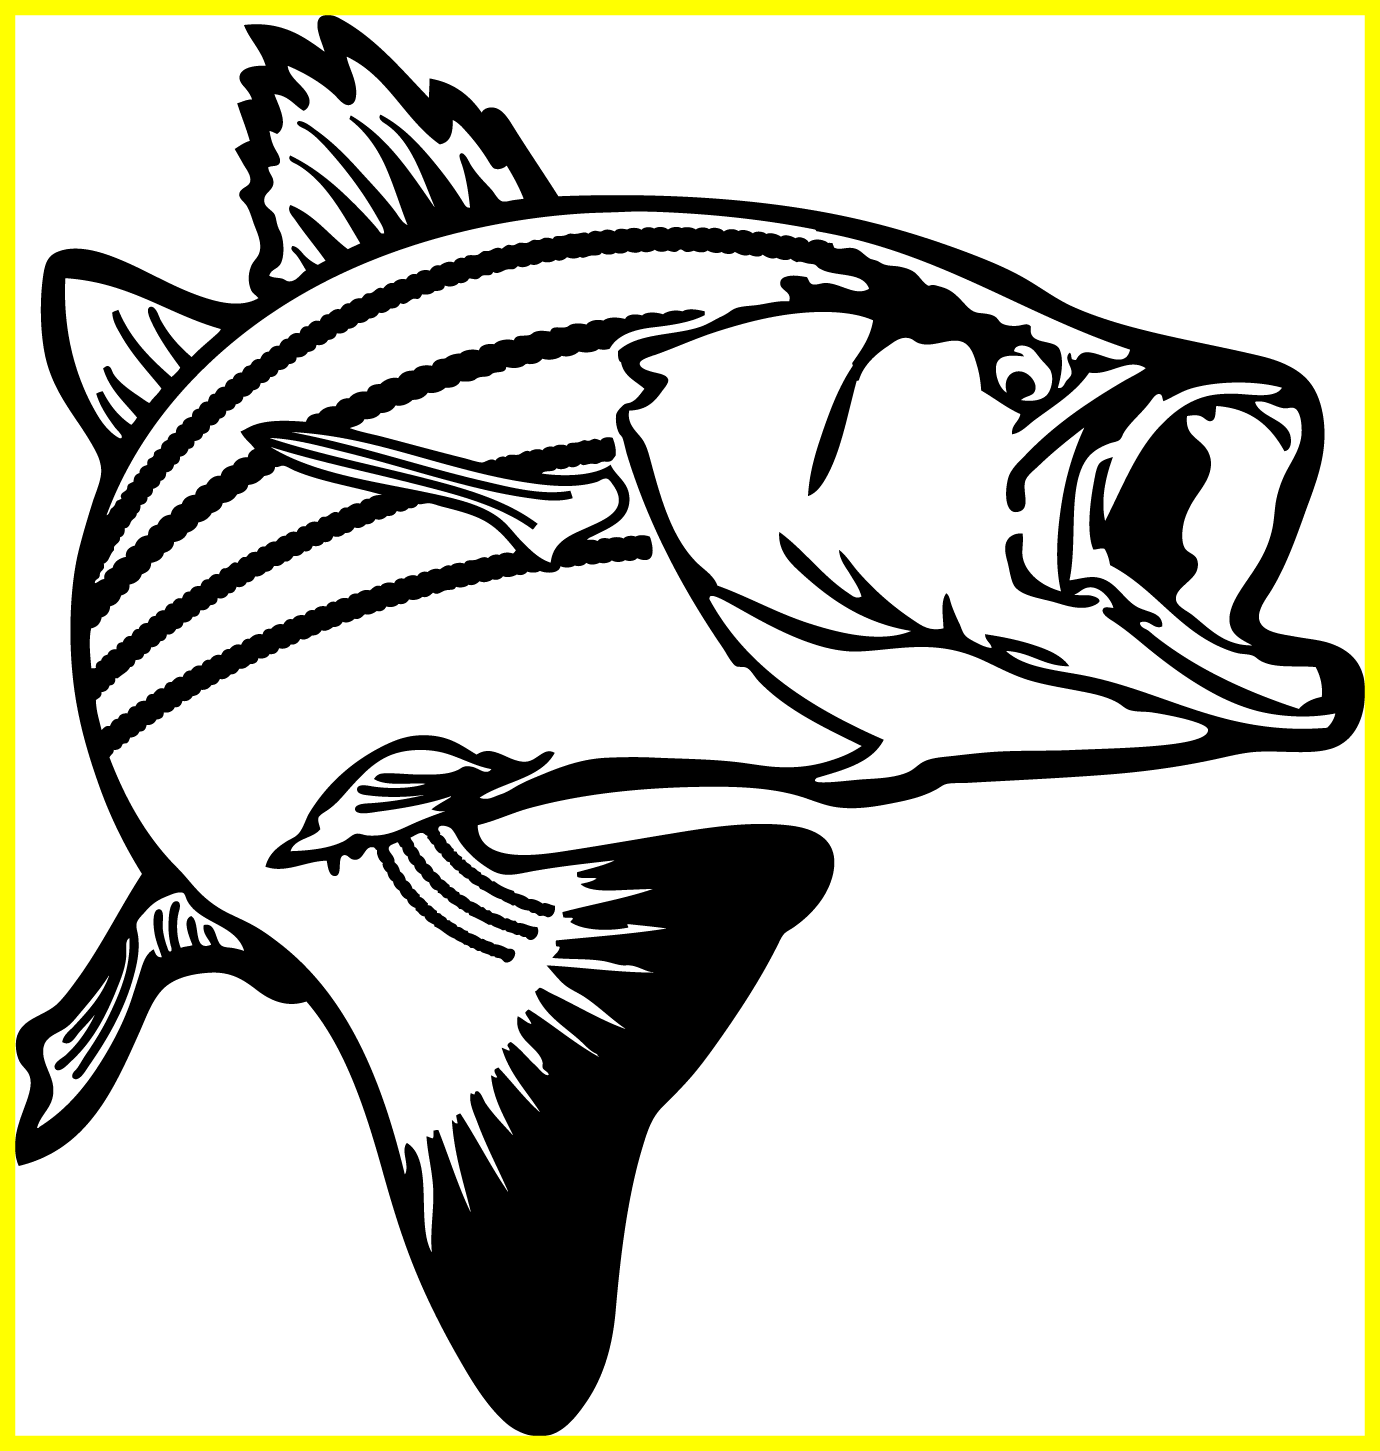 Panda black and white. Fish clipart face